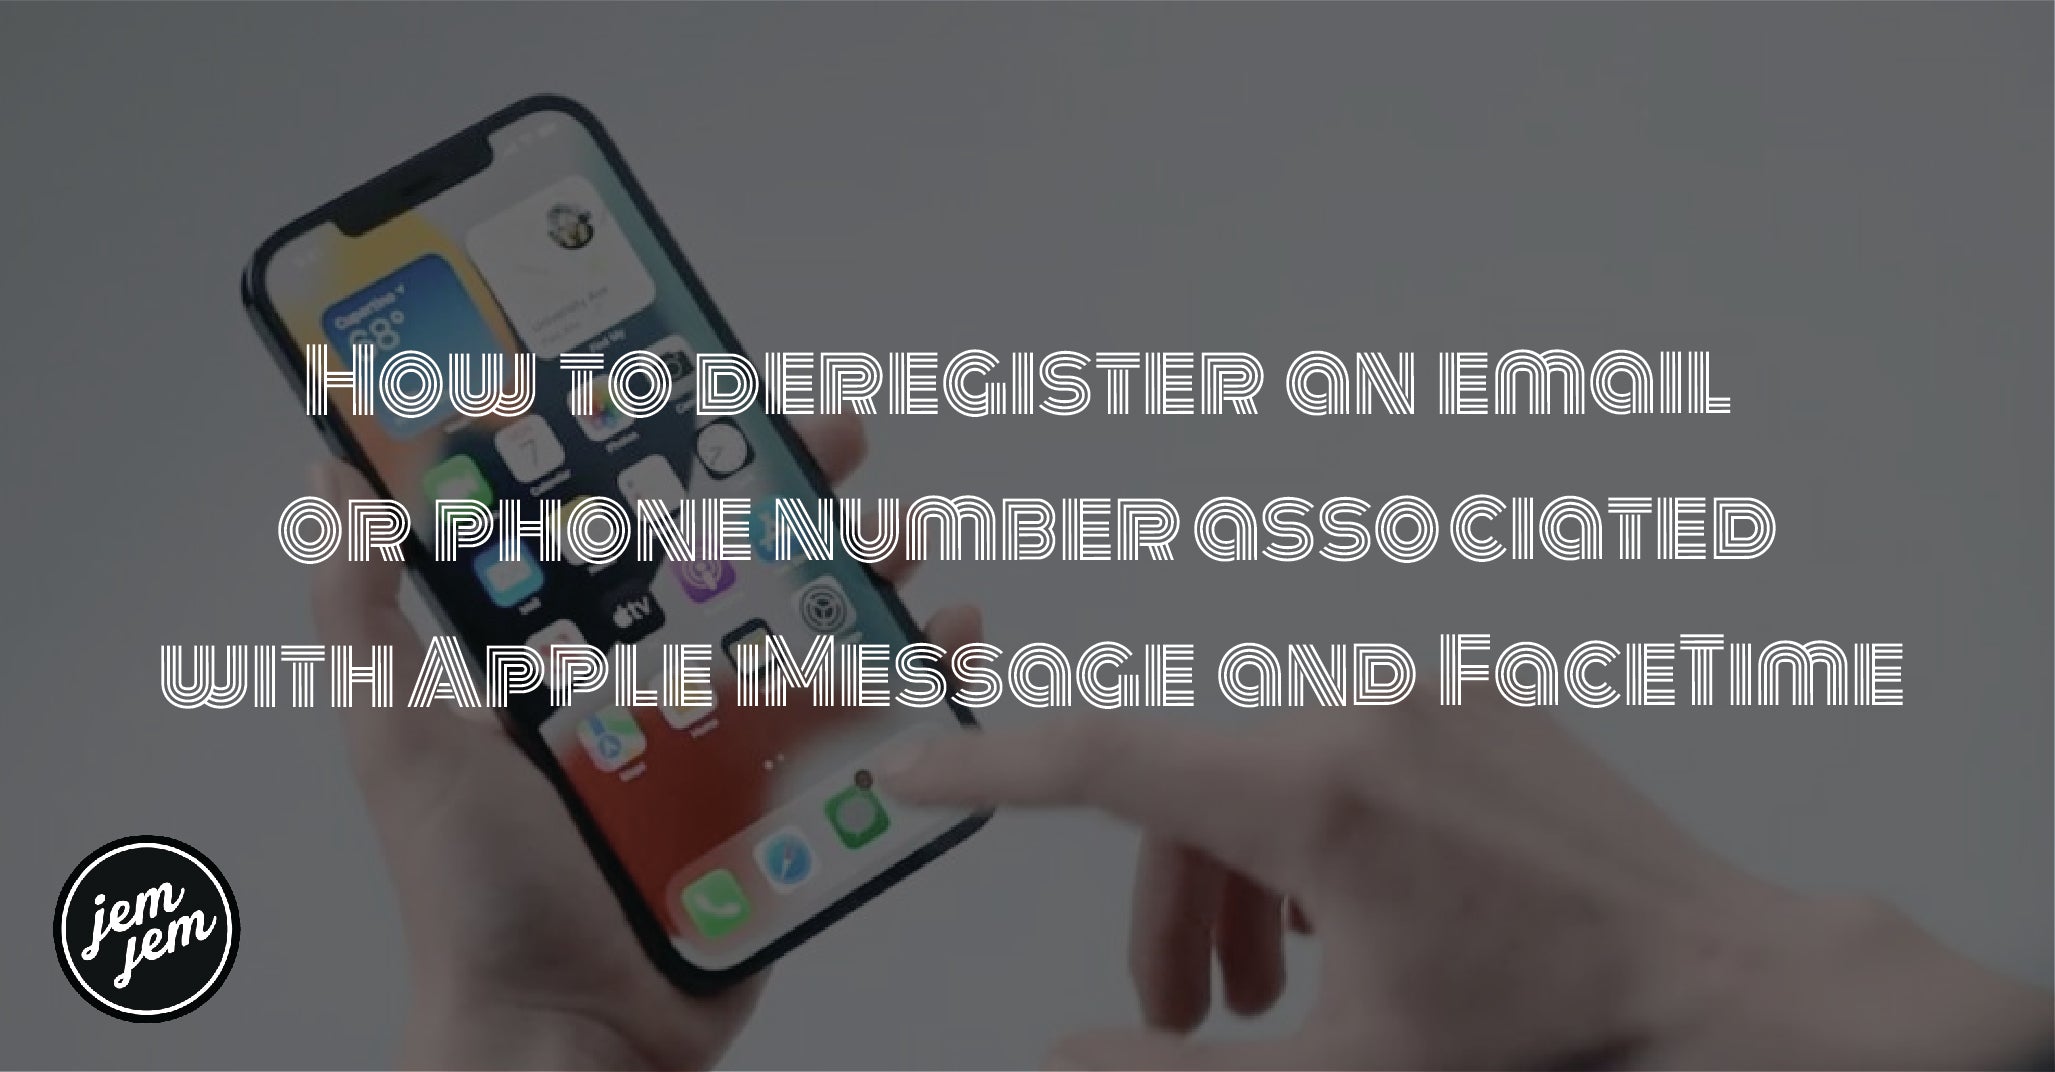 How to deregister an email or phone number associated with Apple iMessage and FaceTime